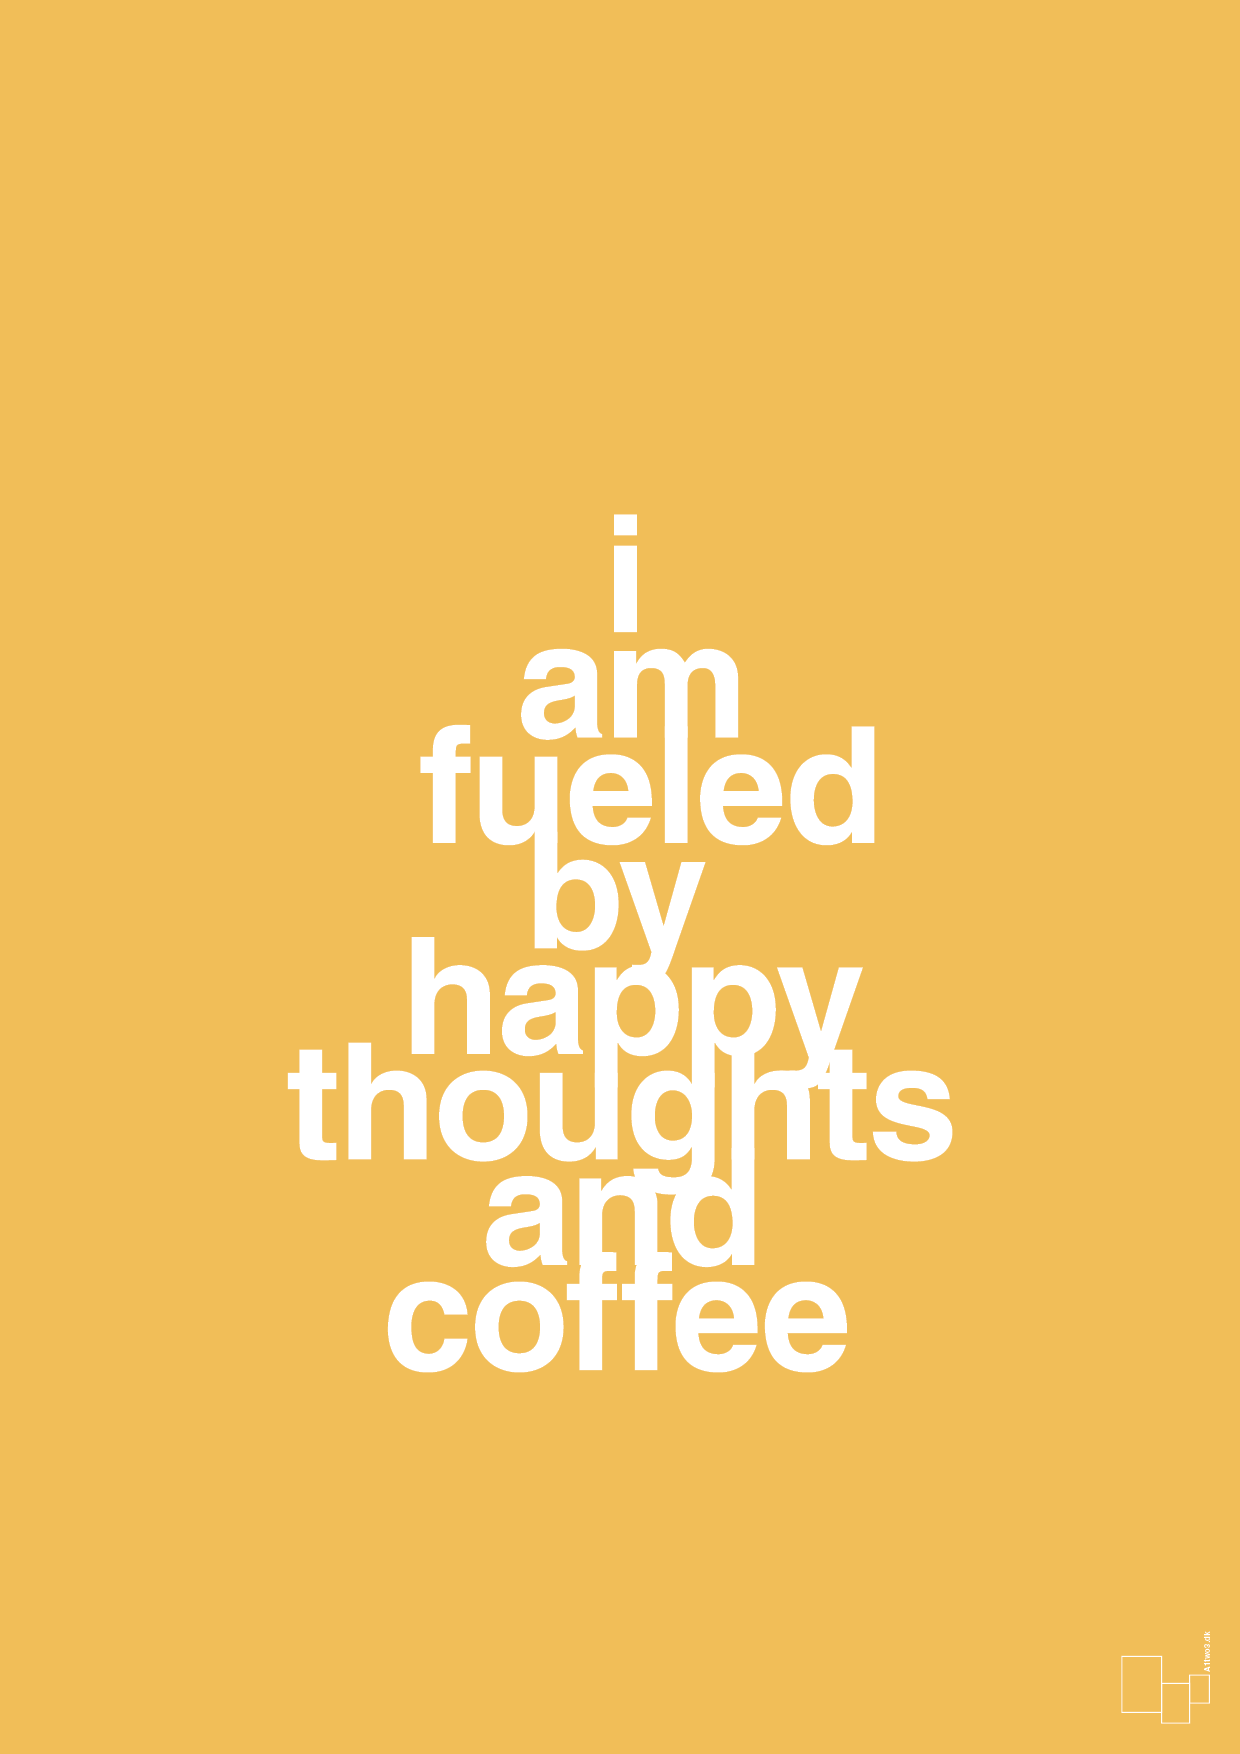 i am fueled by happy thoughts and coffee - Plakat med Mad & Drikke i Honeycomb